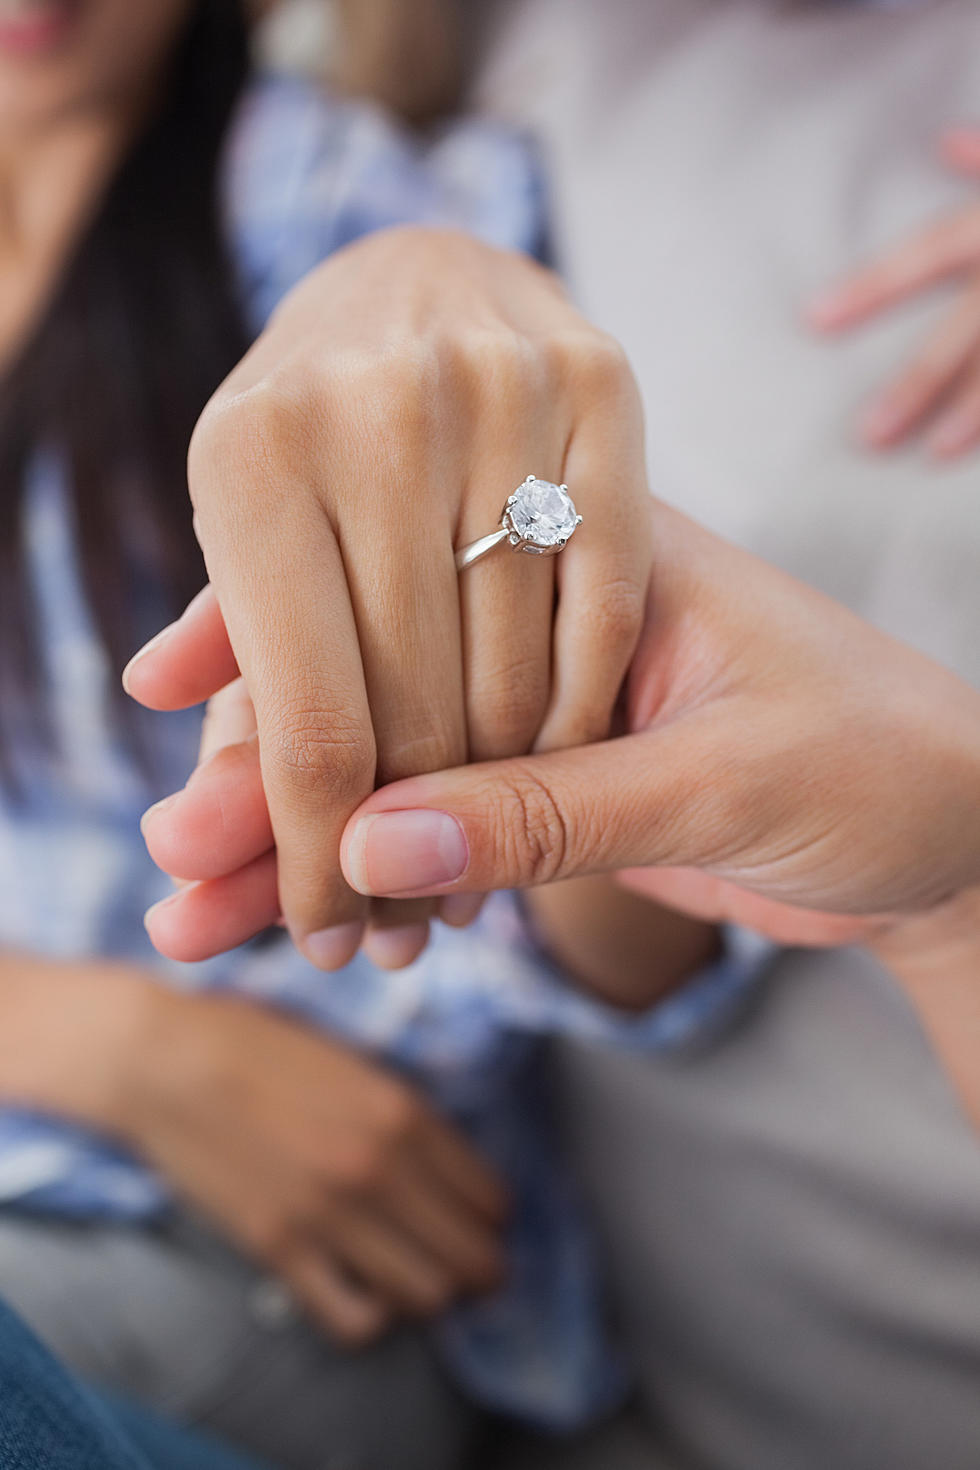 Should We Tell Our Friend Her Engagement Ring is Not A Real Diamond?